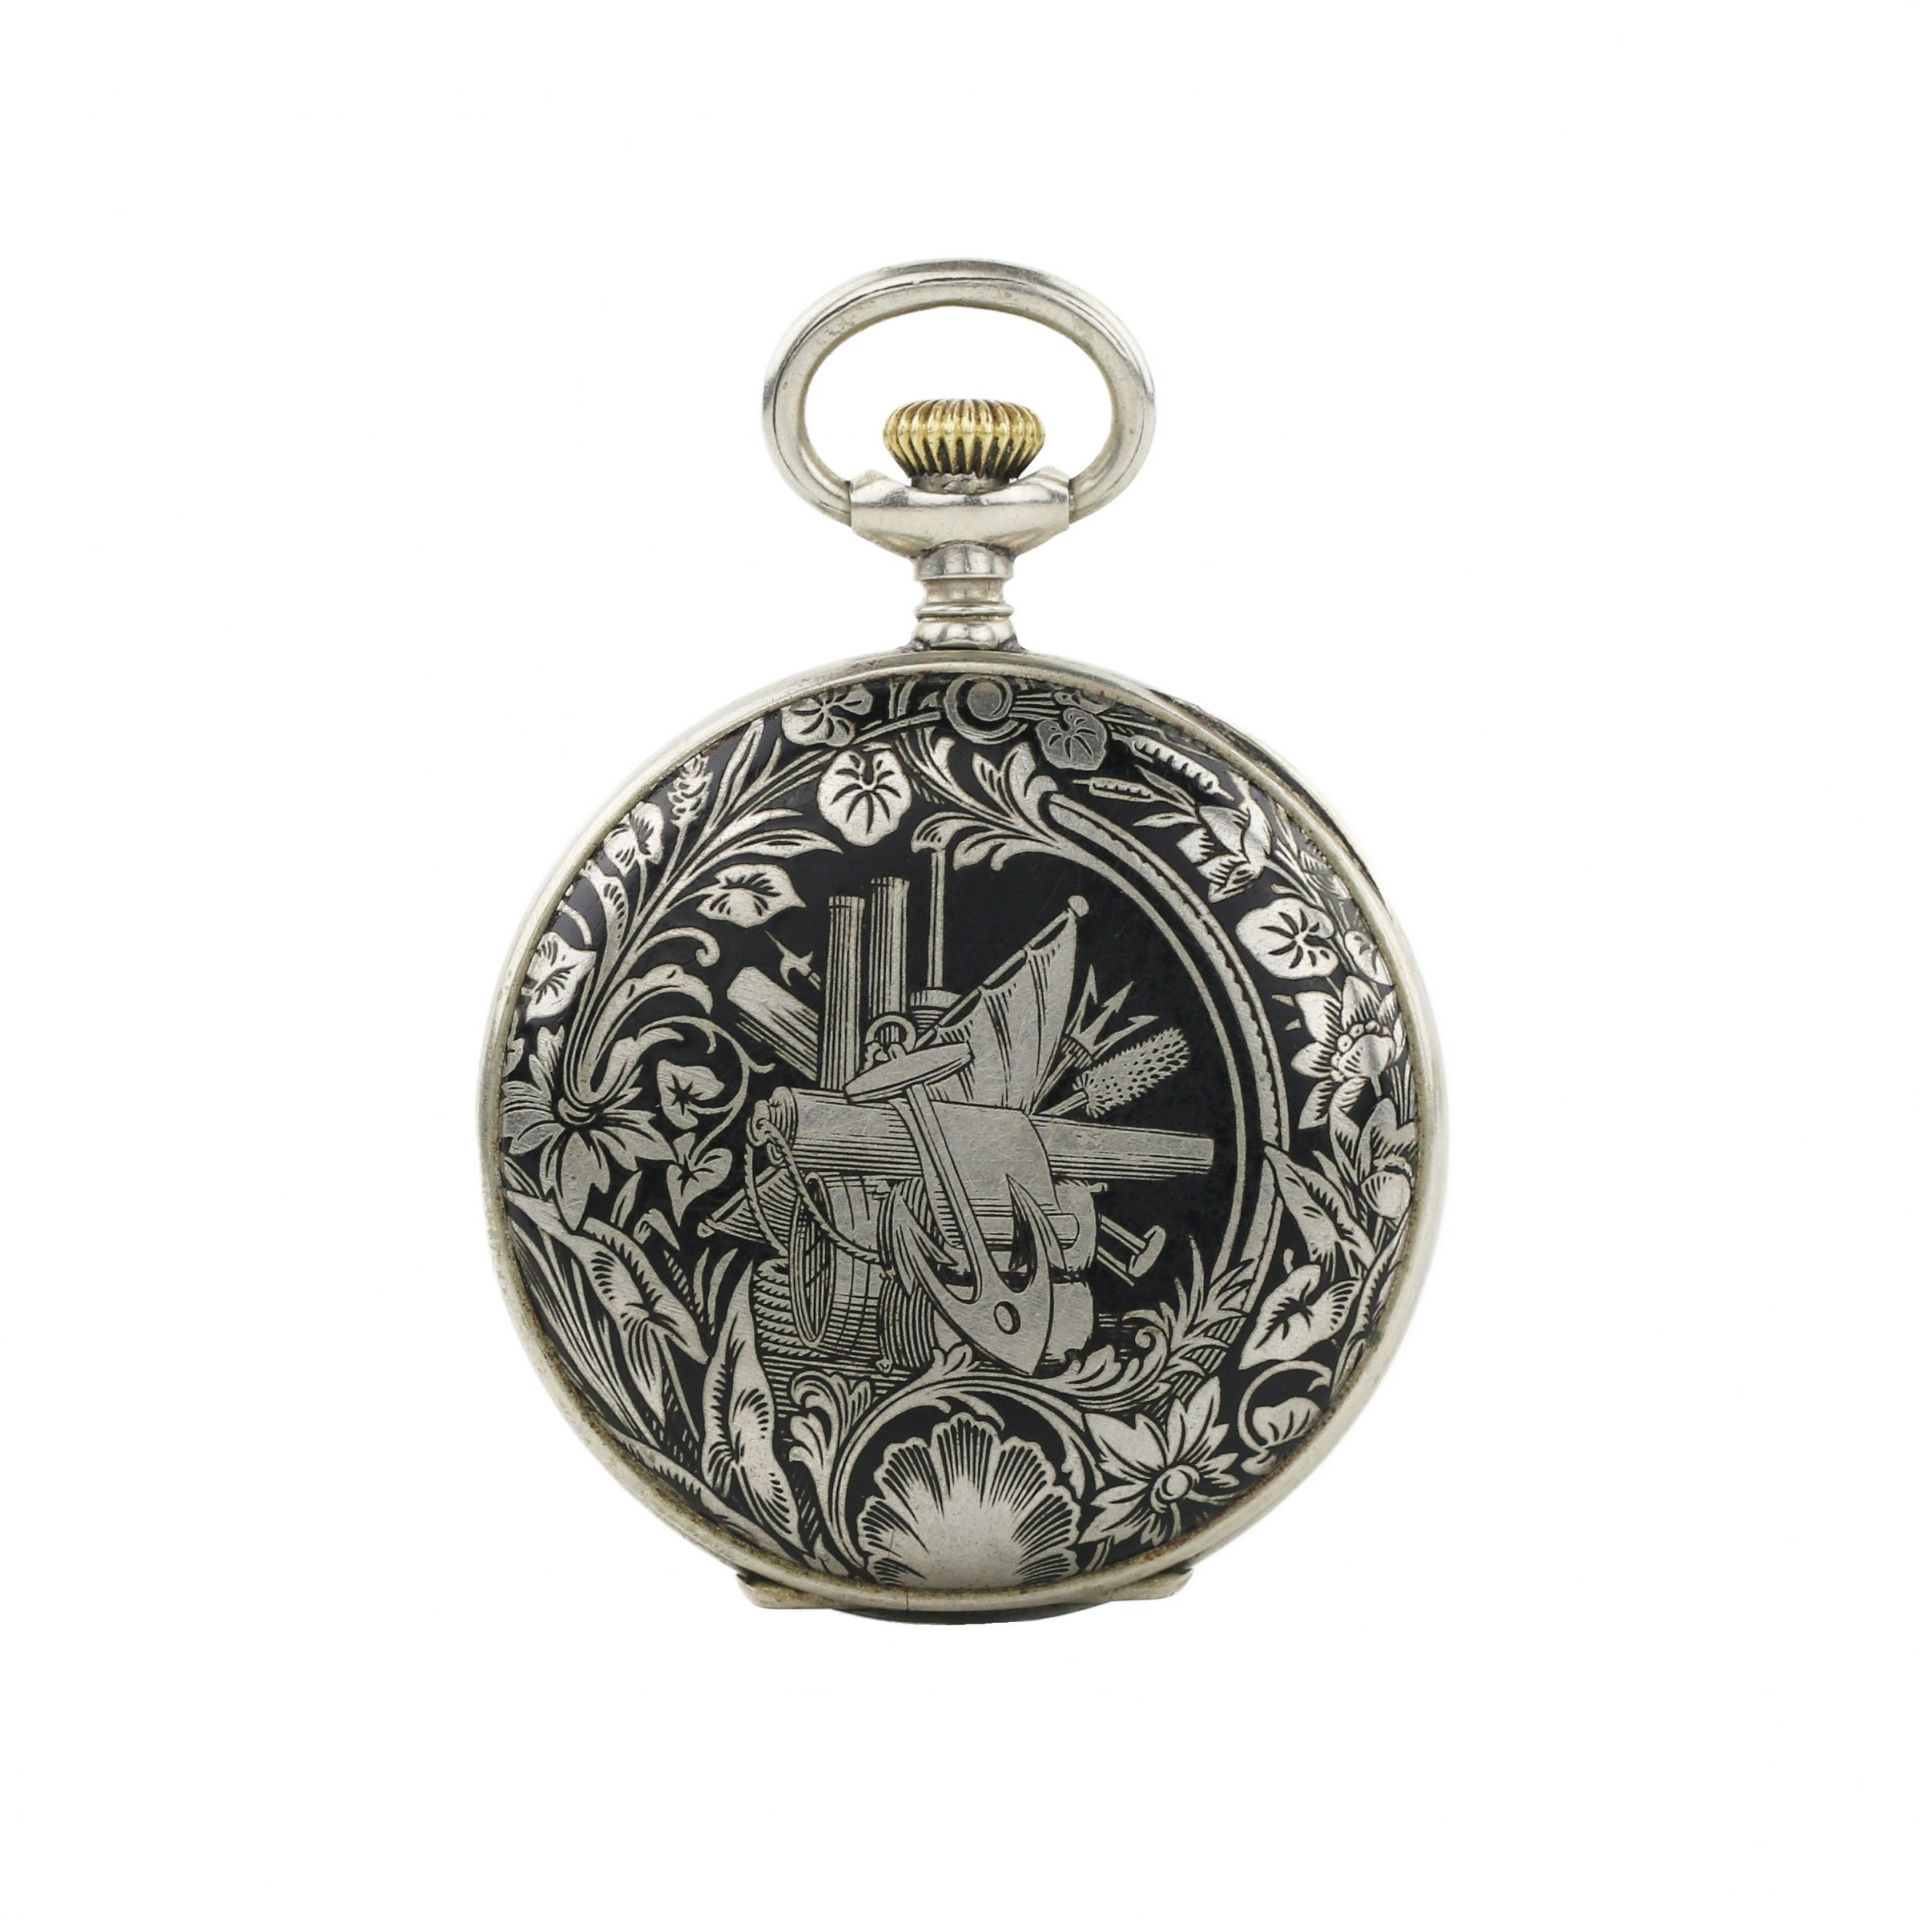 Russian pocket watch with blackened metal pattern. Diogenes company. Early 20th century. - Image 4 of 5